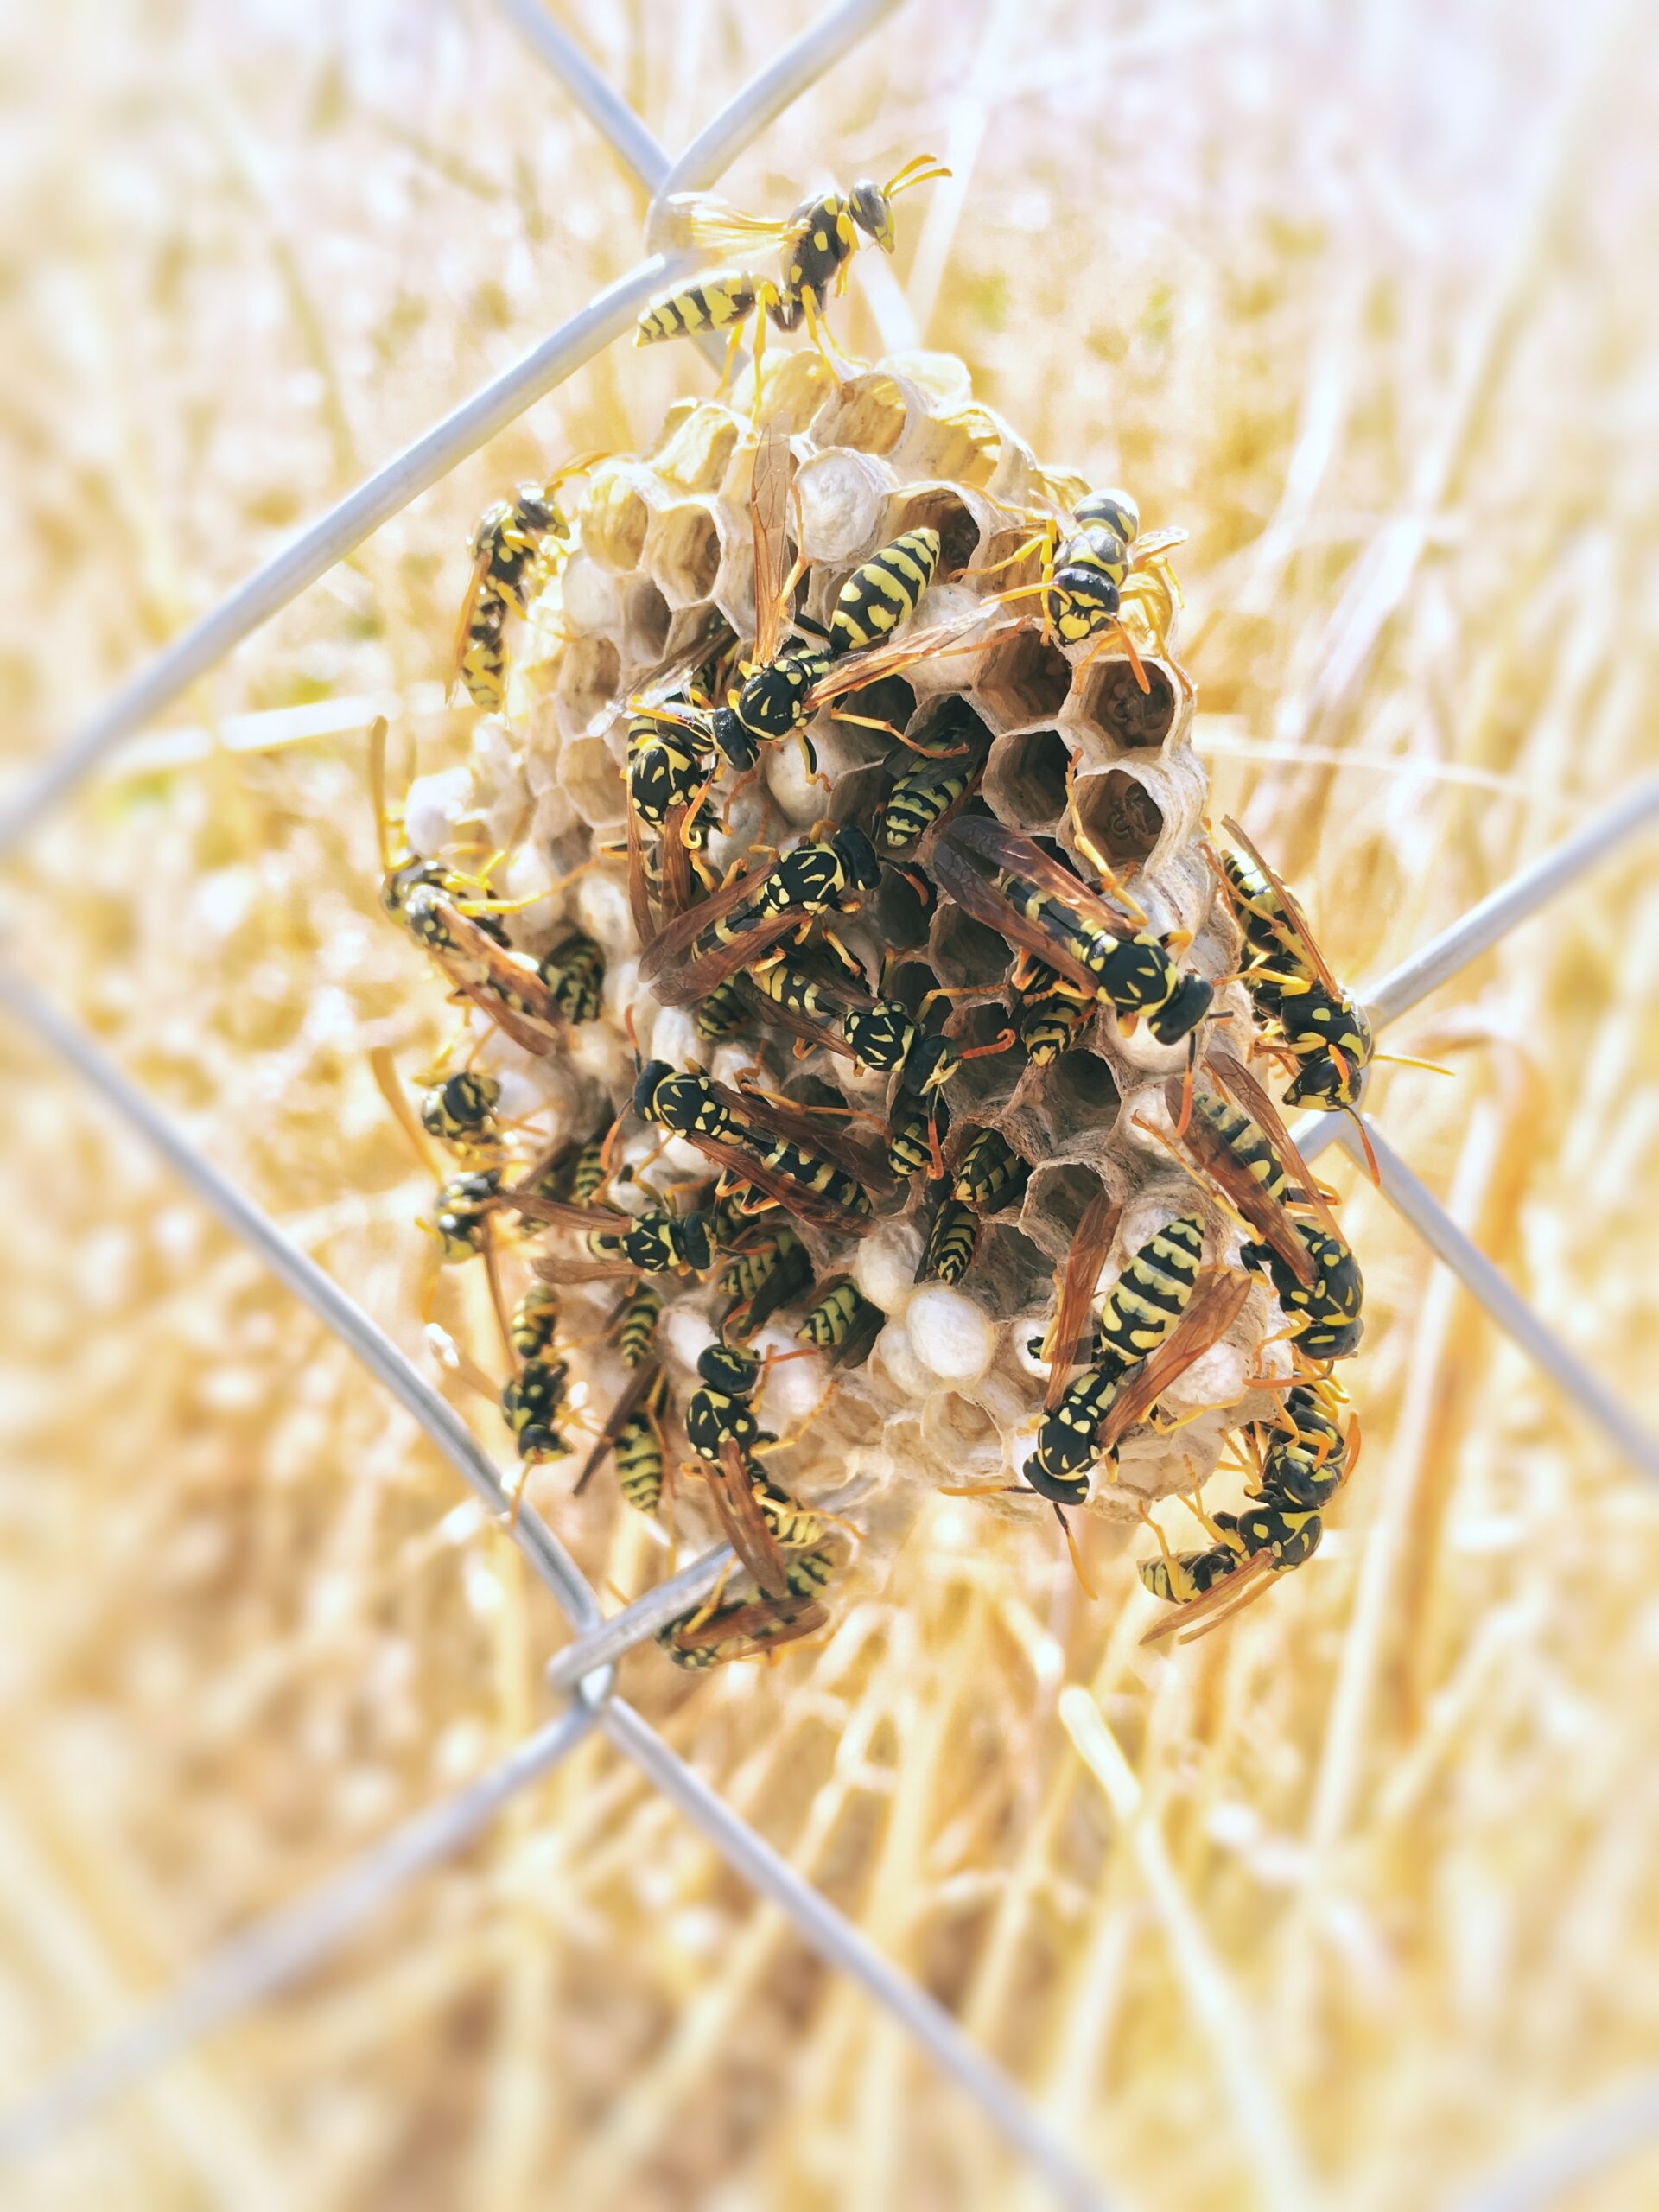 wasps on fence calgary, how to remove wasps on fences